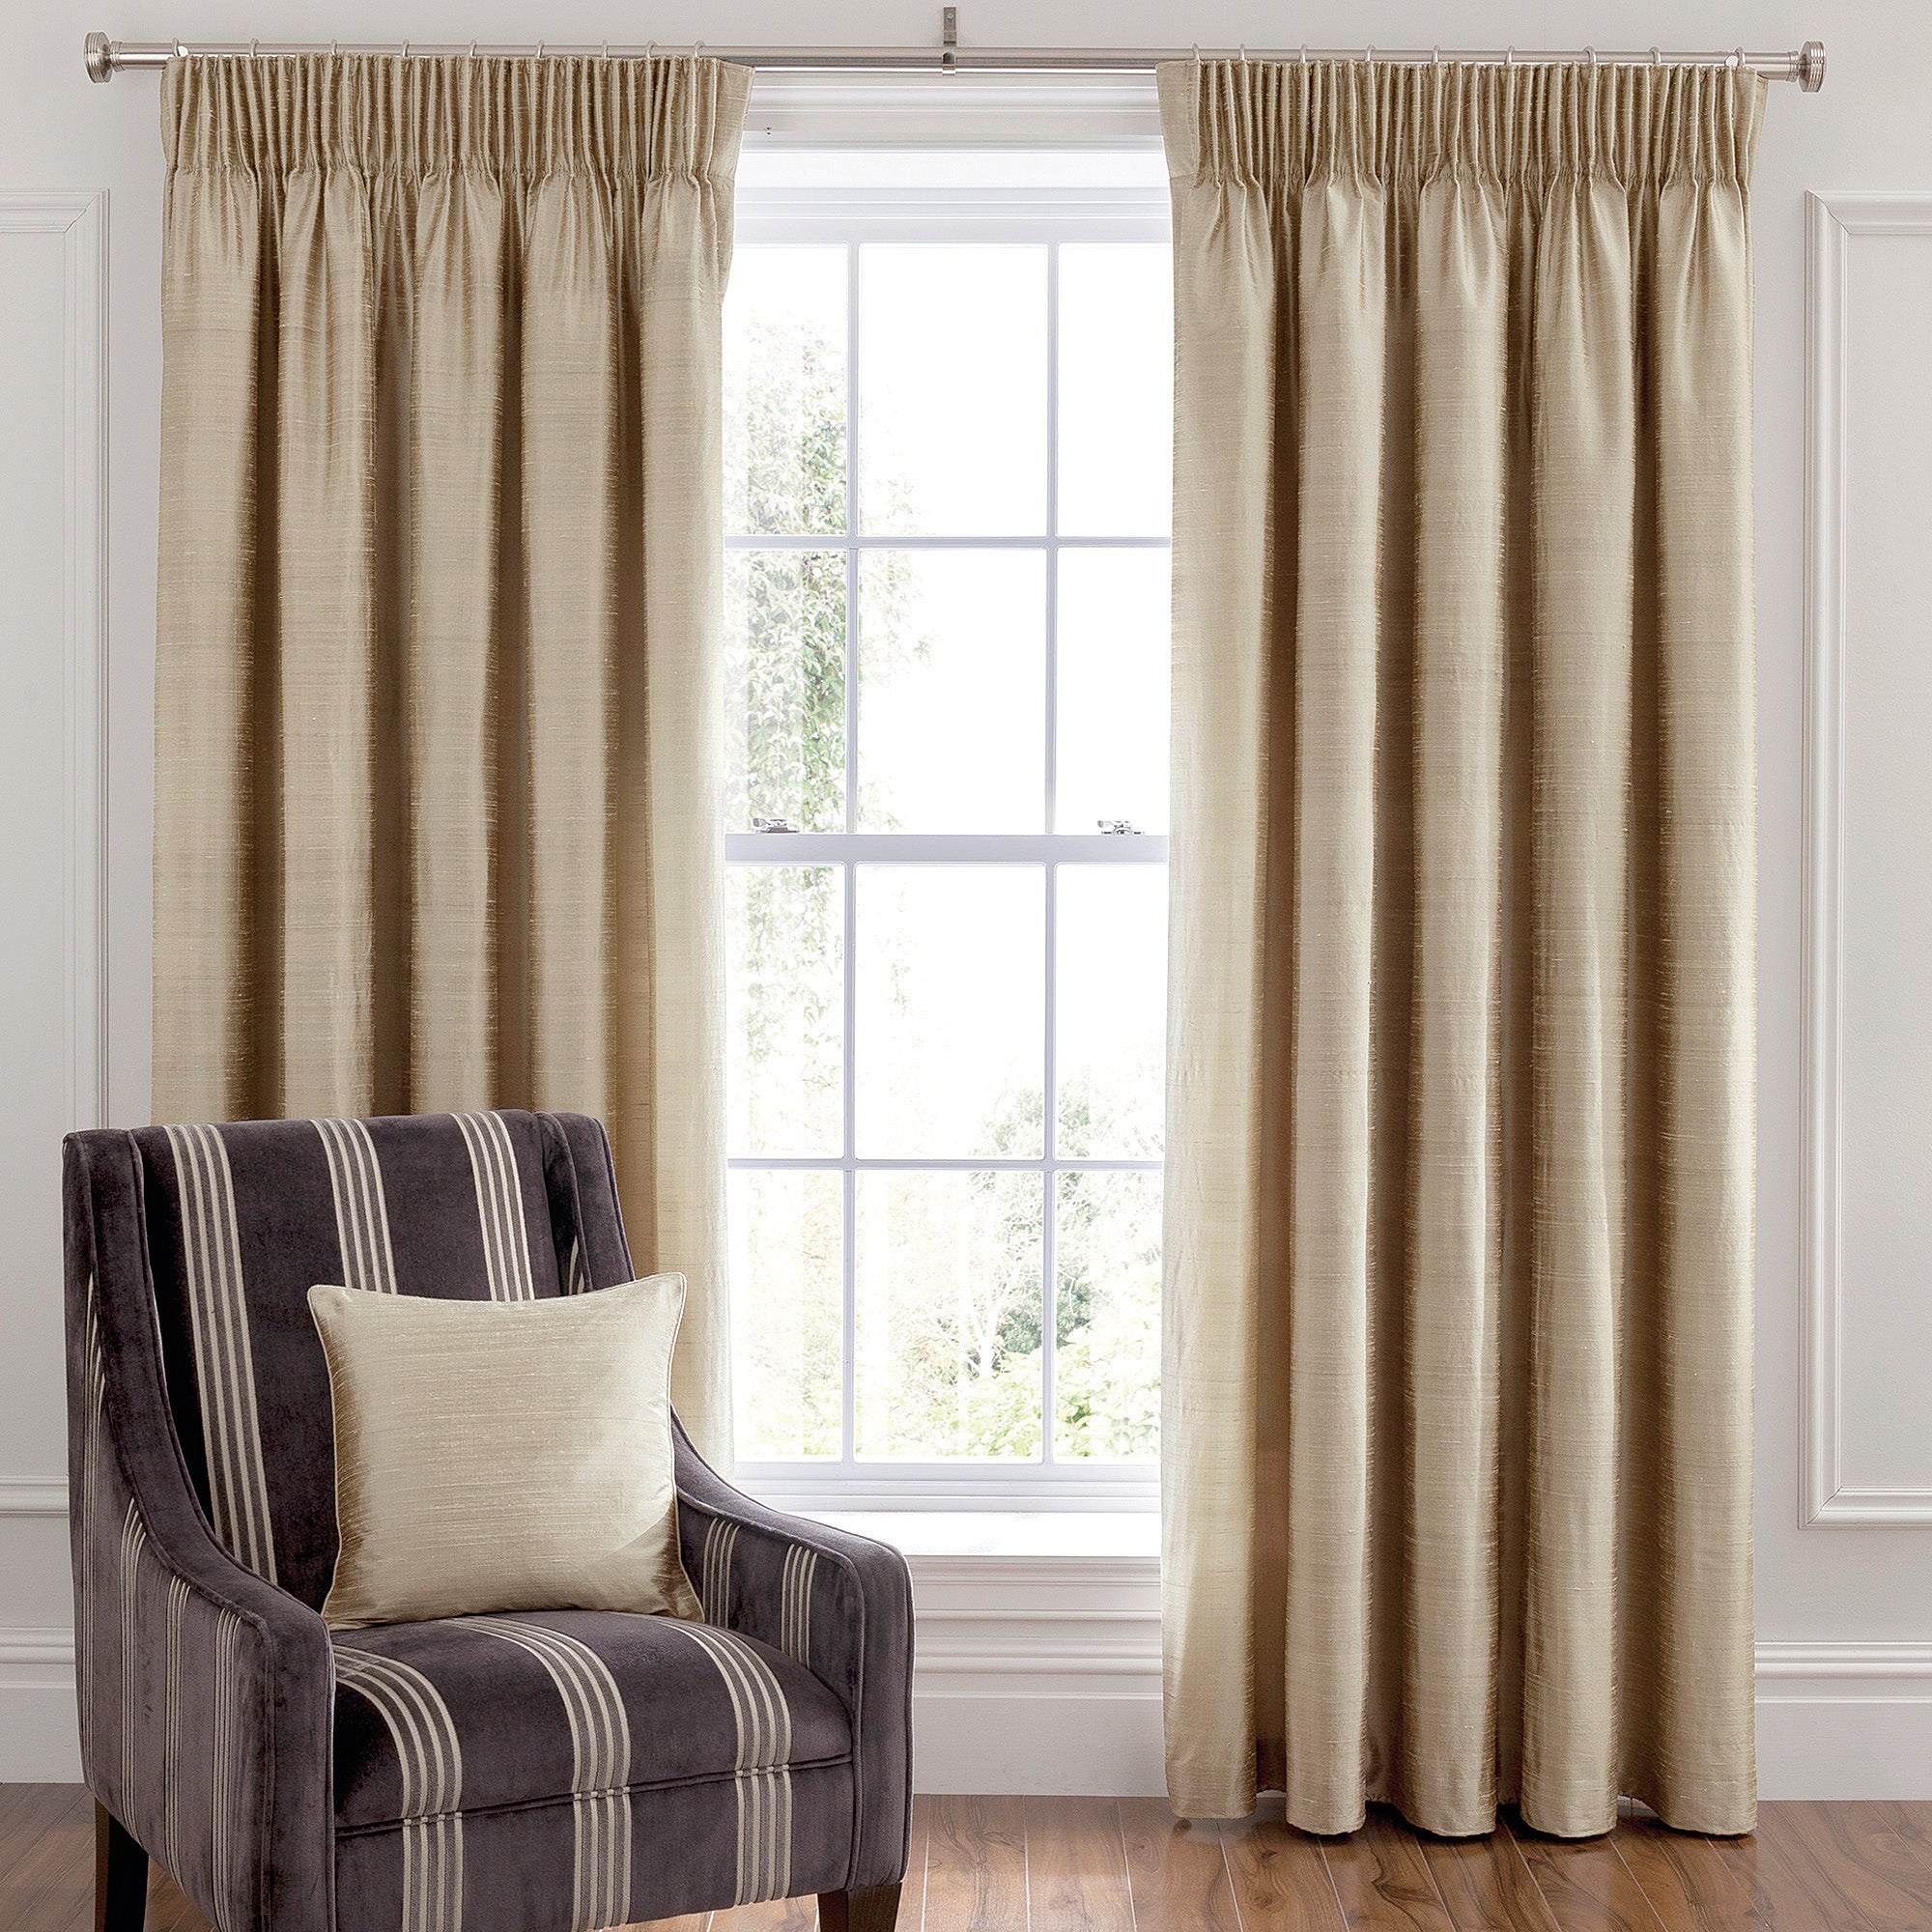 Dorma Beresford Champagne Lined Pencil Pleat Curtains | Dunelm